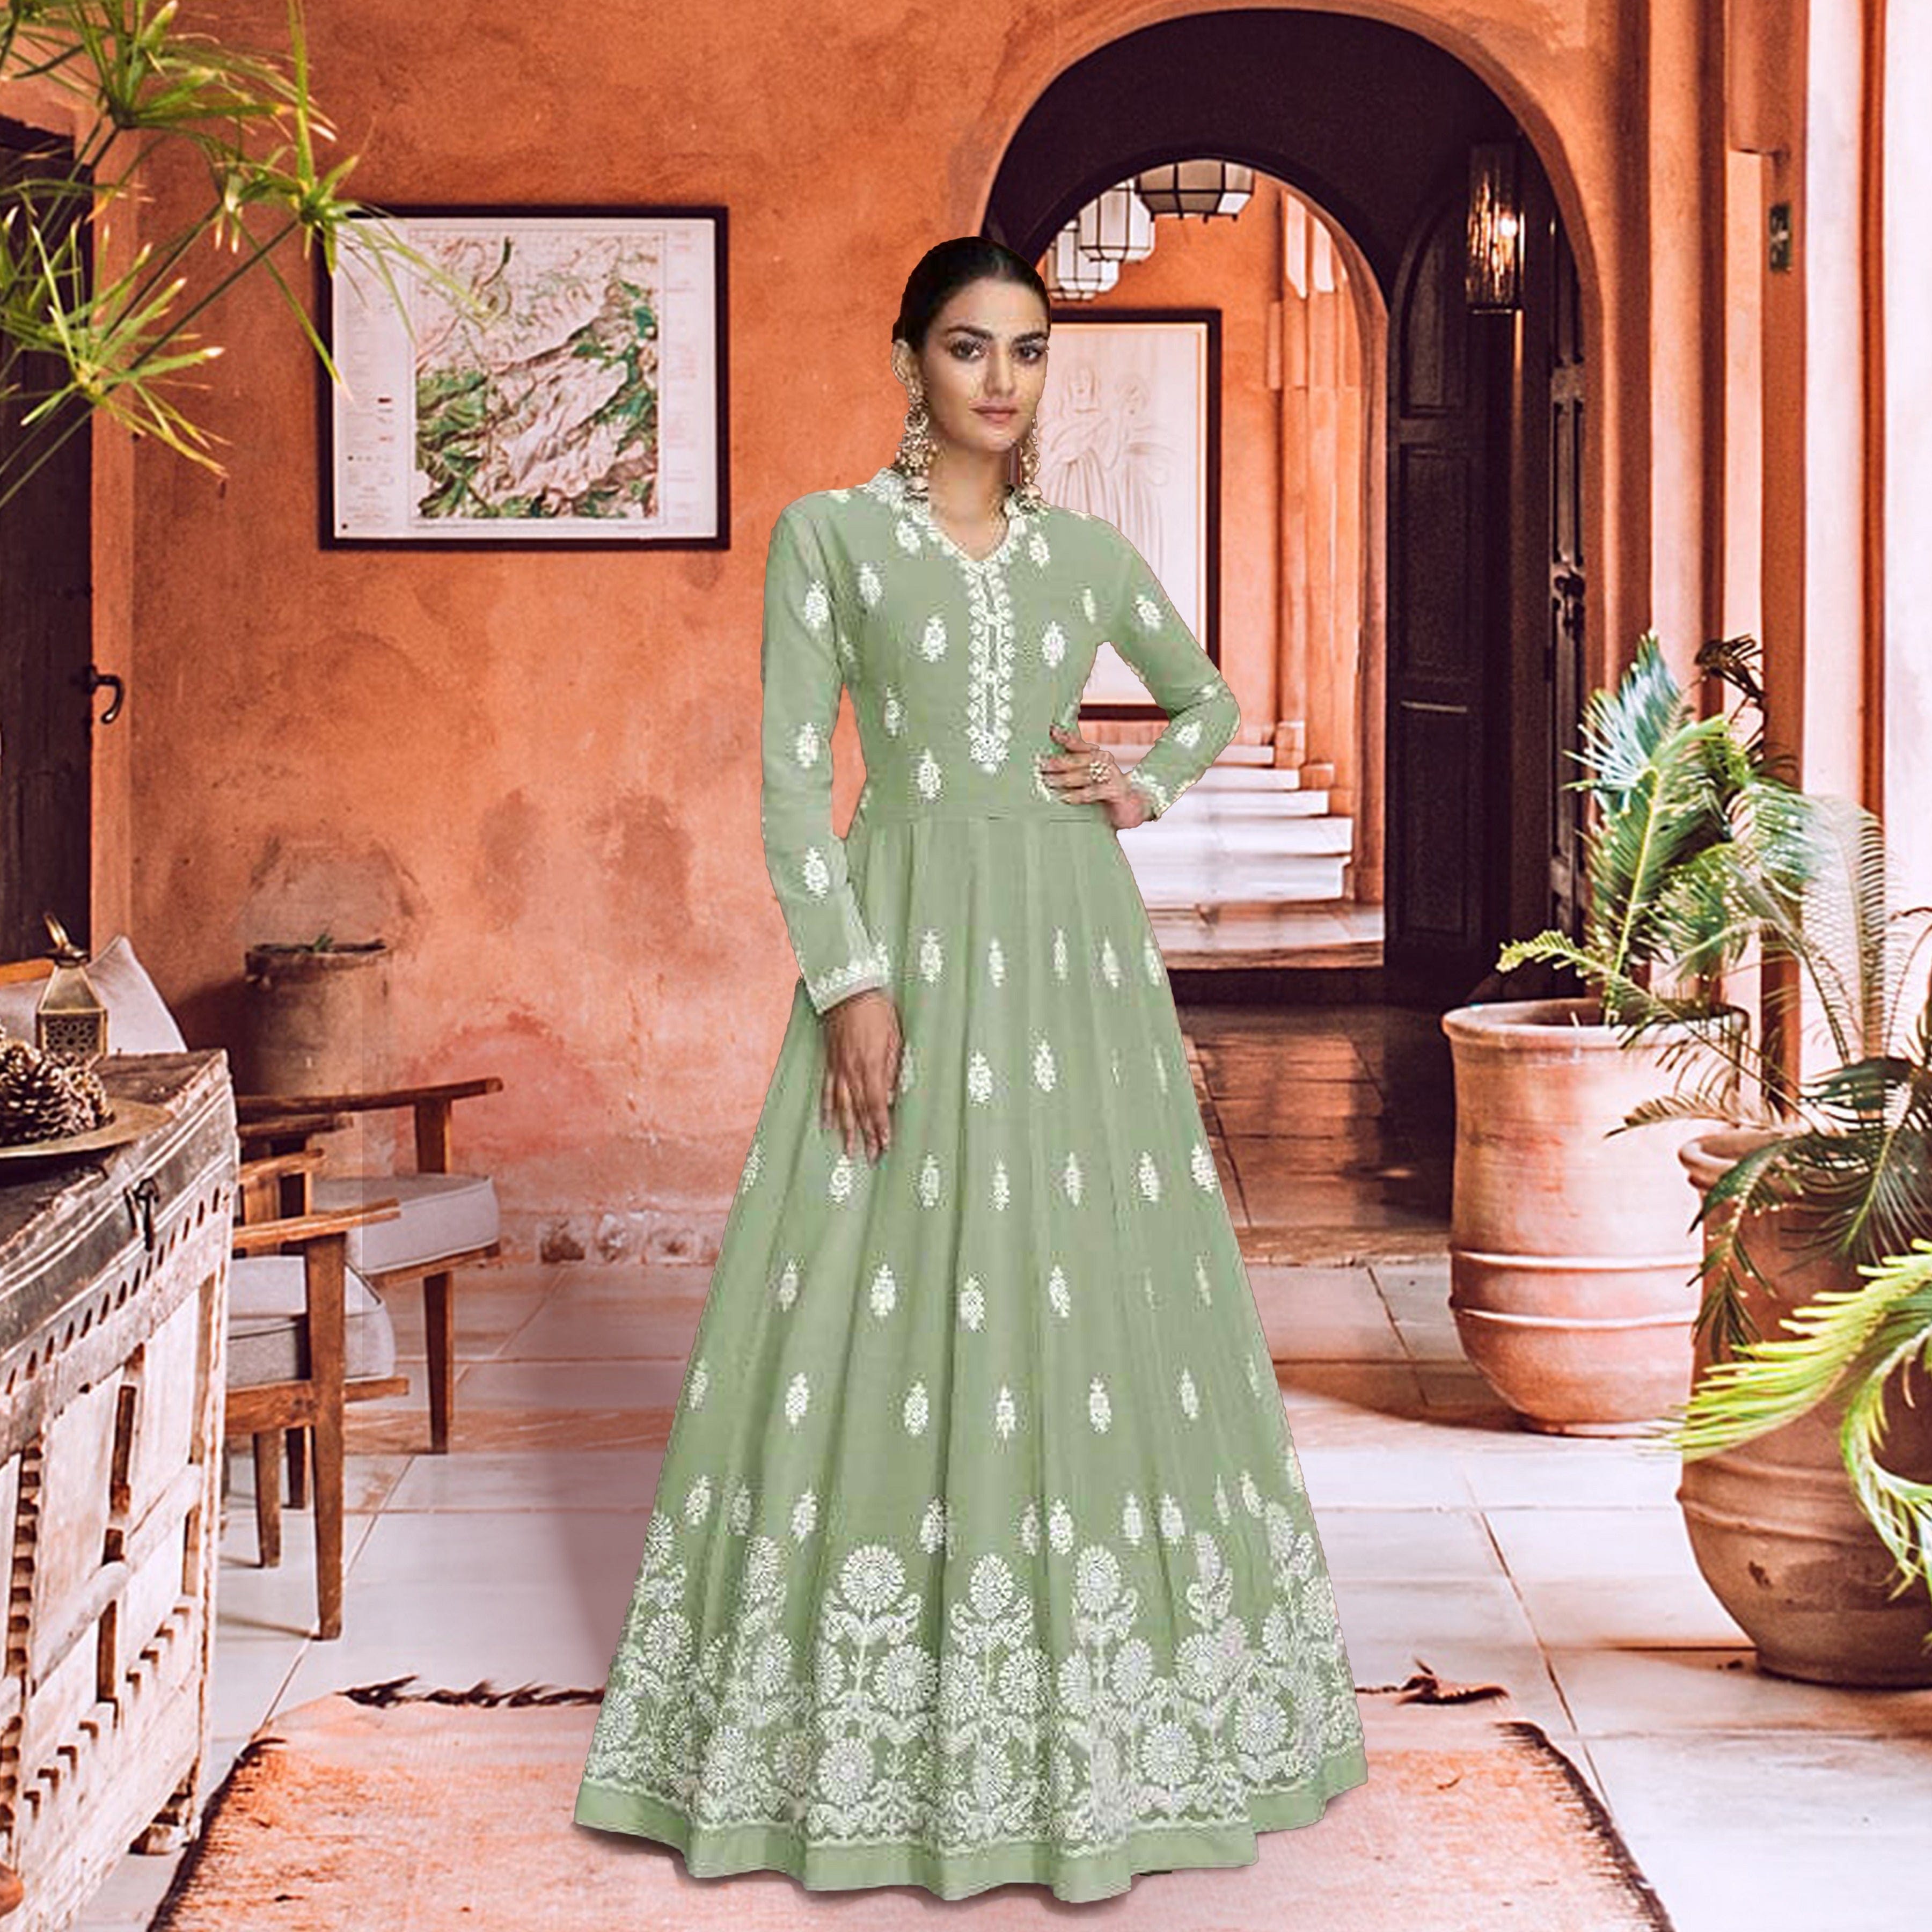 hand embroidered light green chikankari work evening party dress gown long sleeves made in india online shopping designer wear